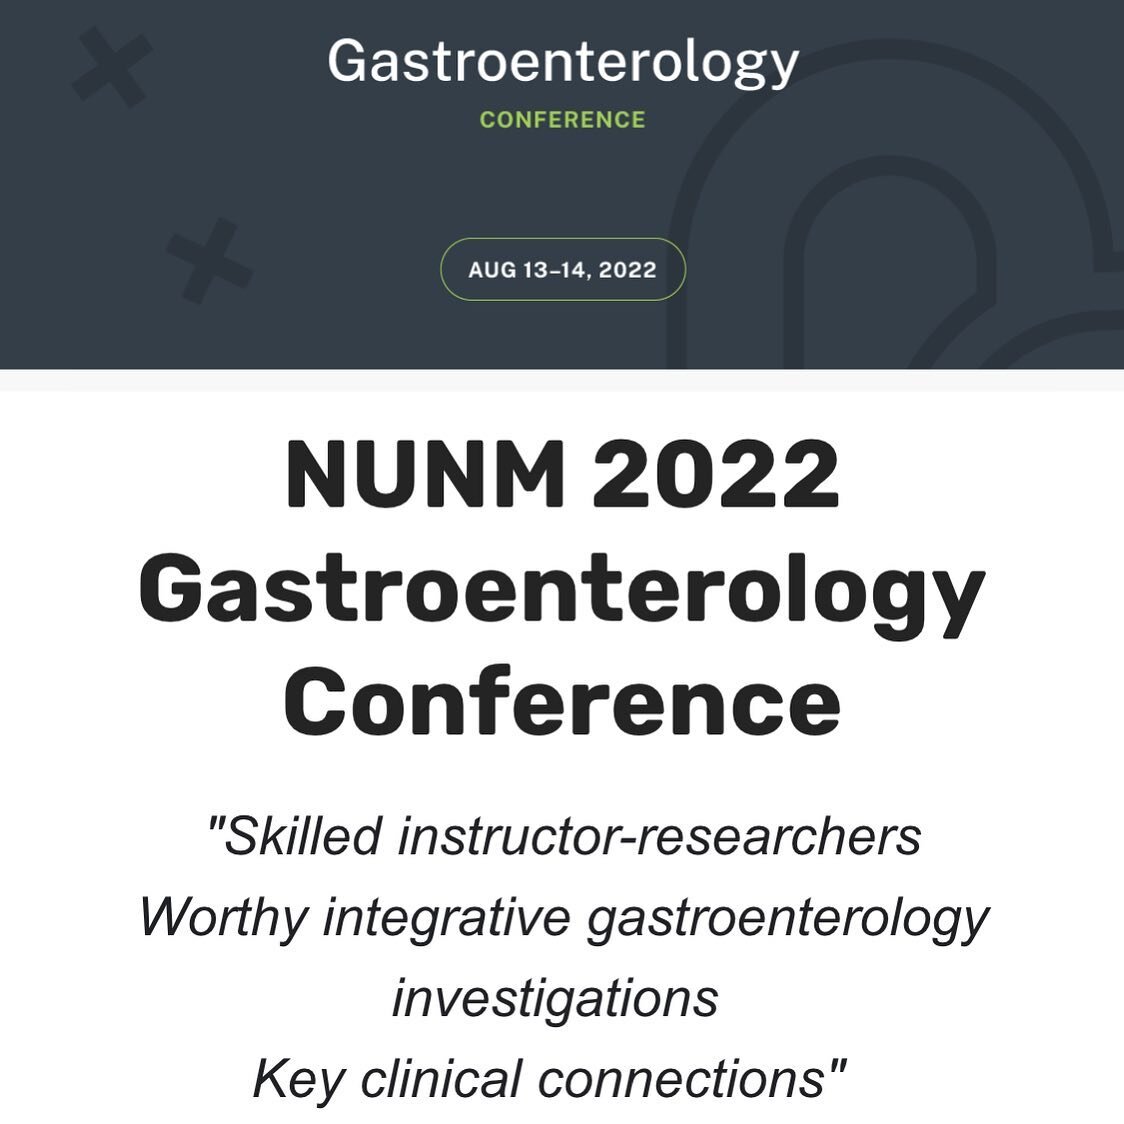 We recently attend NUNM&rsquo;s 2022 Gastroenterology conference in August. We&rsquo;ll be sharing some clinical pearls with you all in our next blog post! 

#treatthegut #treatthecause #naturopathicmedicine #gastroenterology #healthegut #holistichea